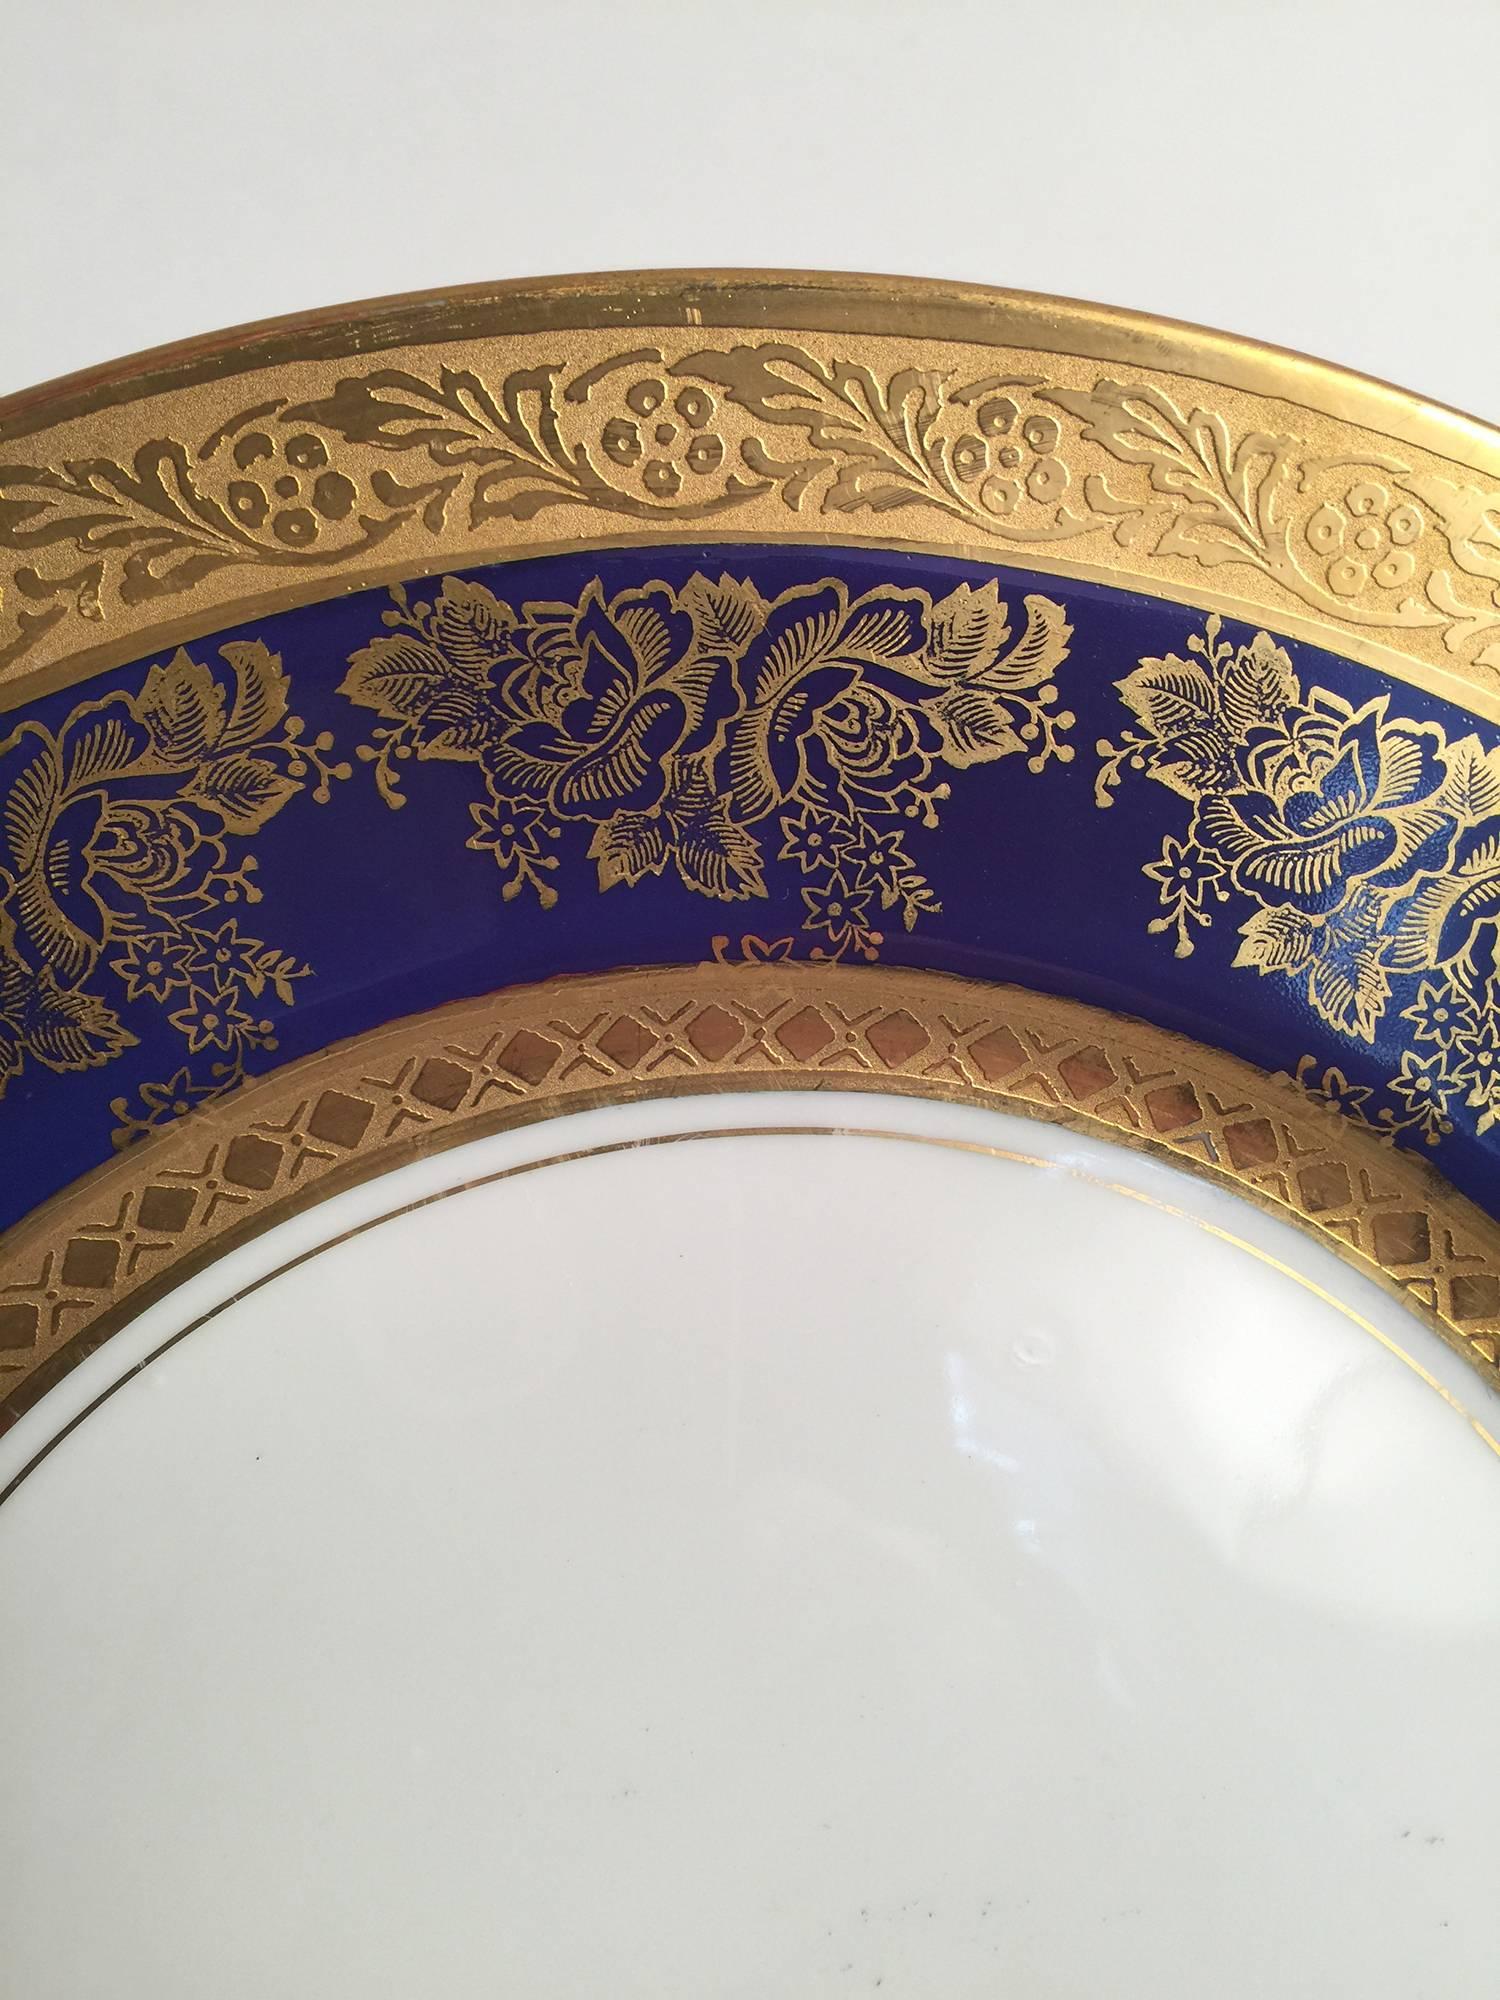 Set of eight gold and cobalt blue service plates marked czech. The rich cobalt background with gilt overlay decotation with white porcelain background. $950 gq dimensions: 11” diameter.